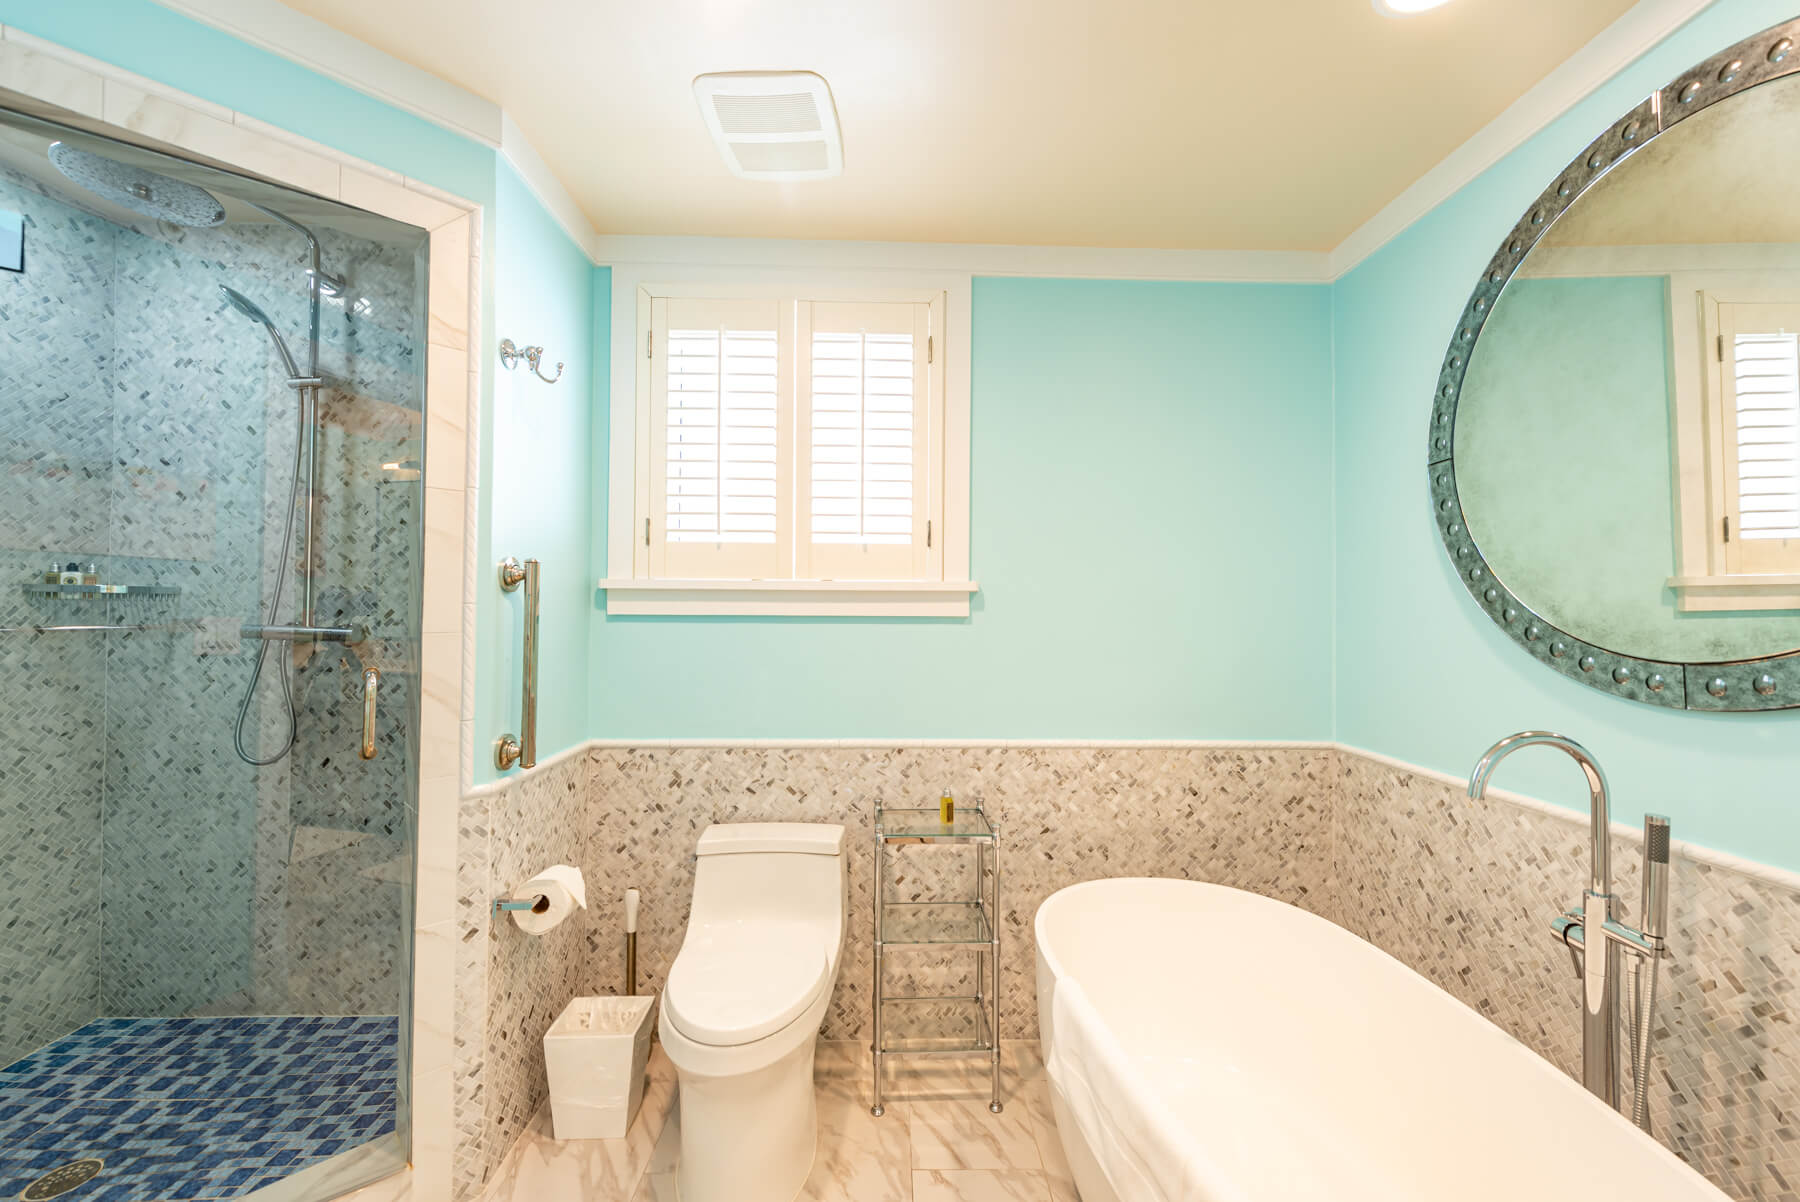 Bathroom of a house with ocean view at The Abaco Club